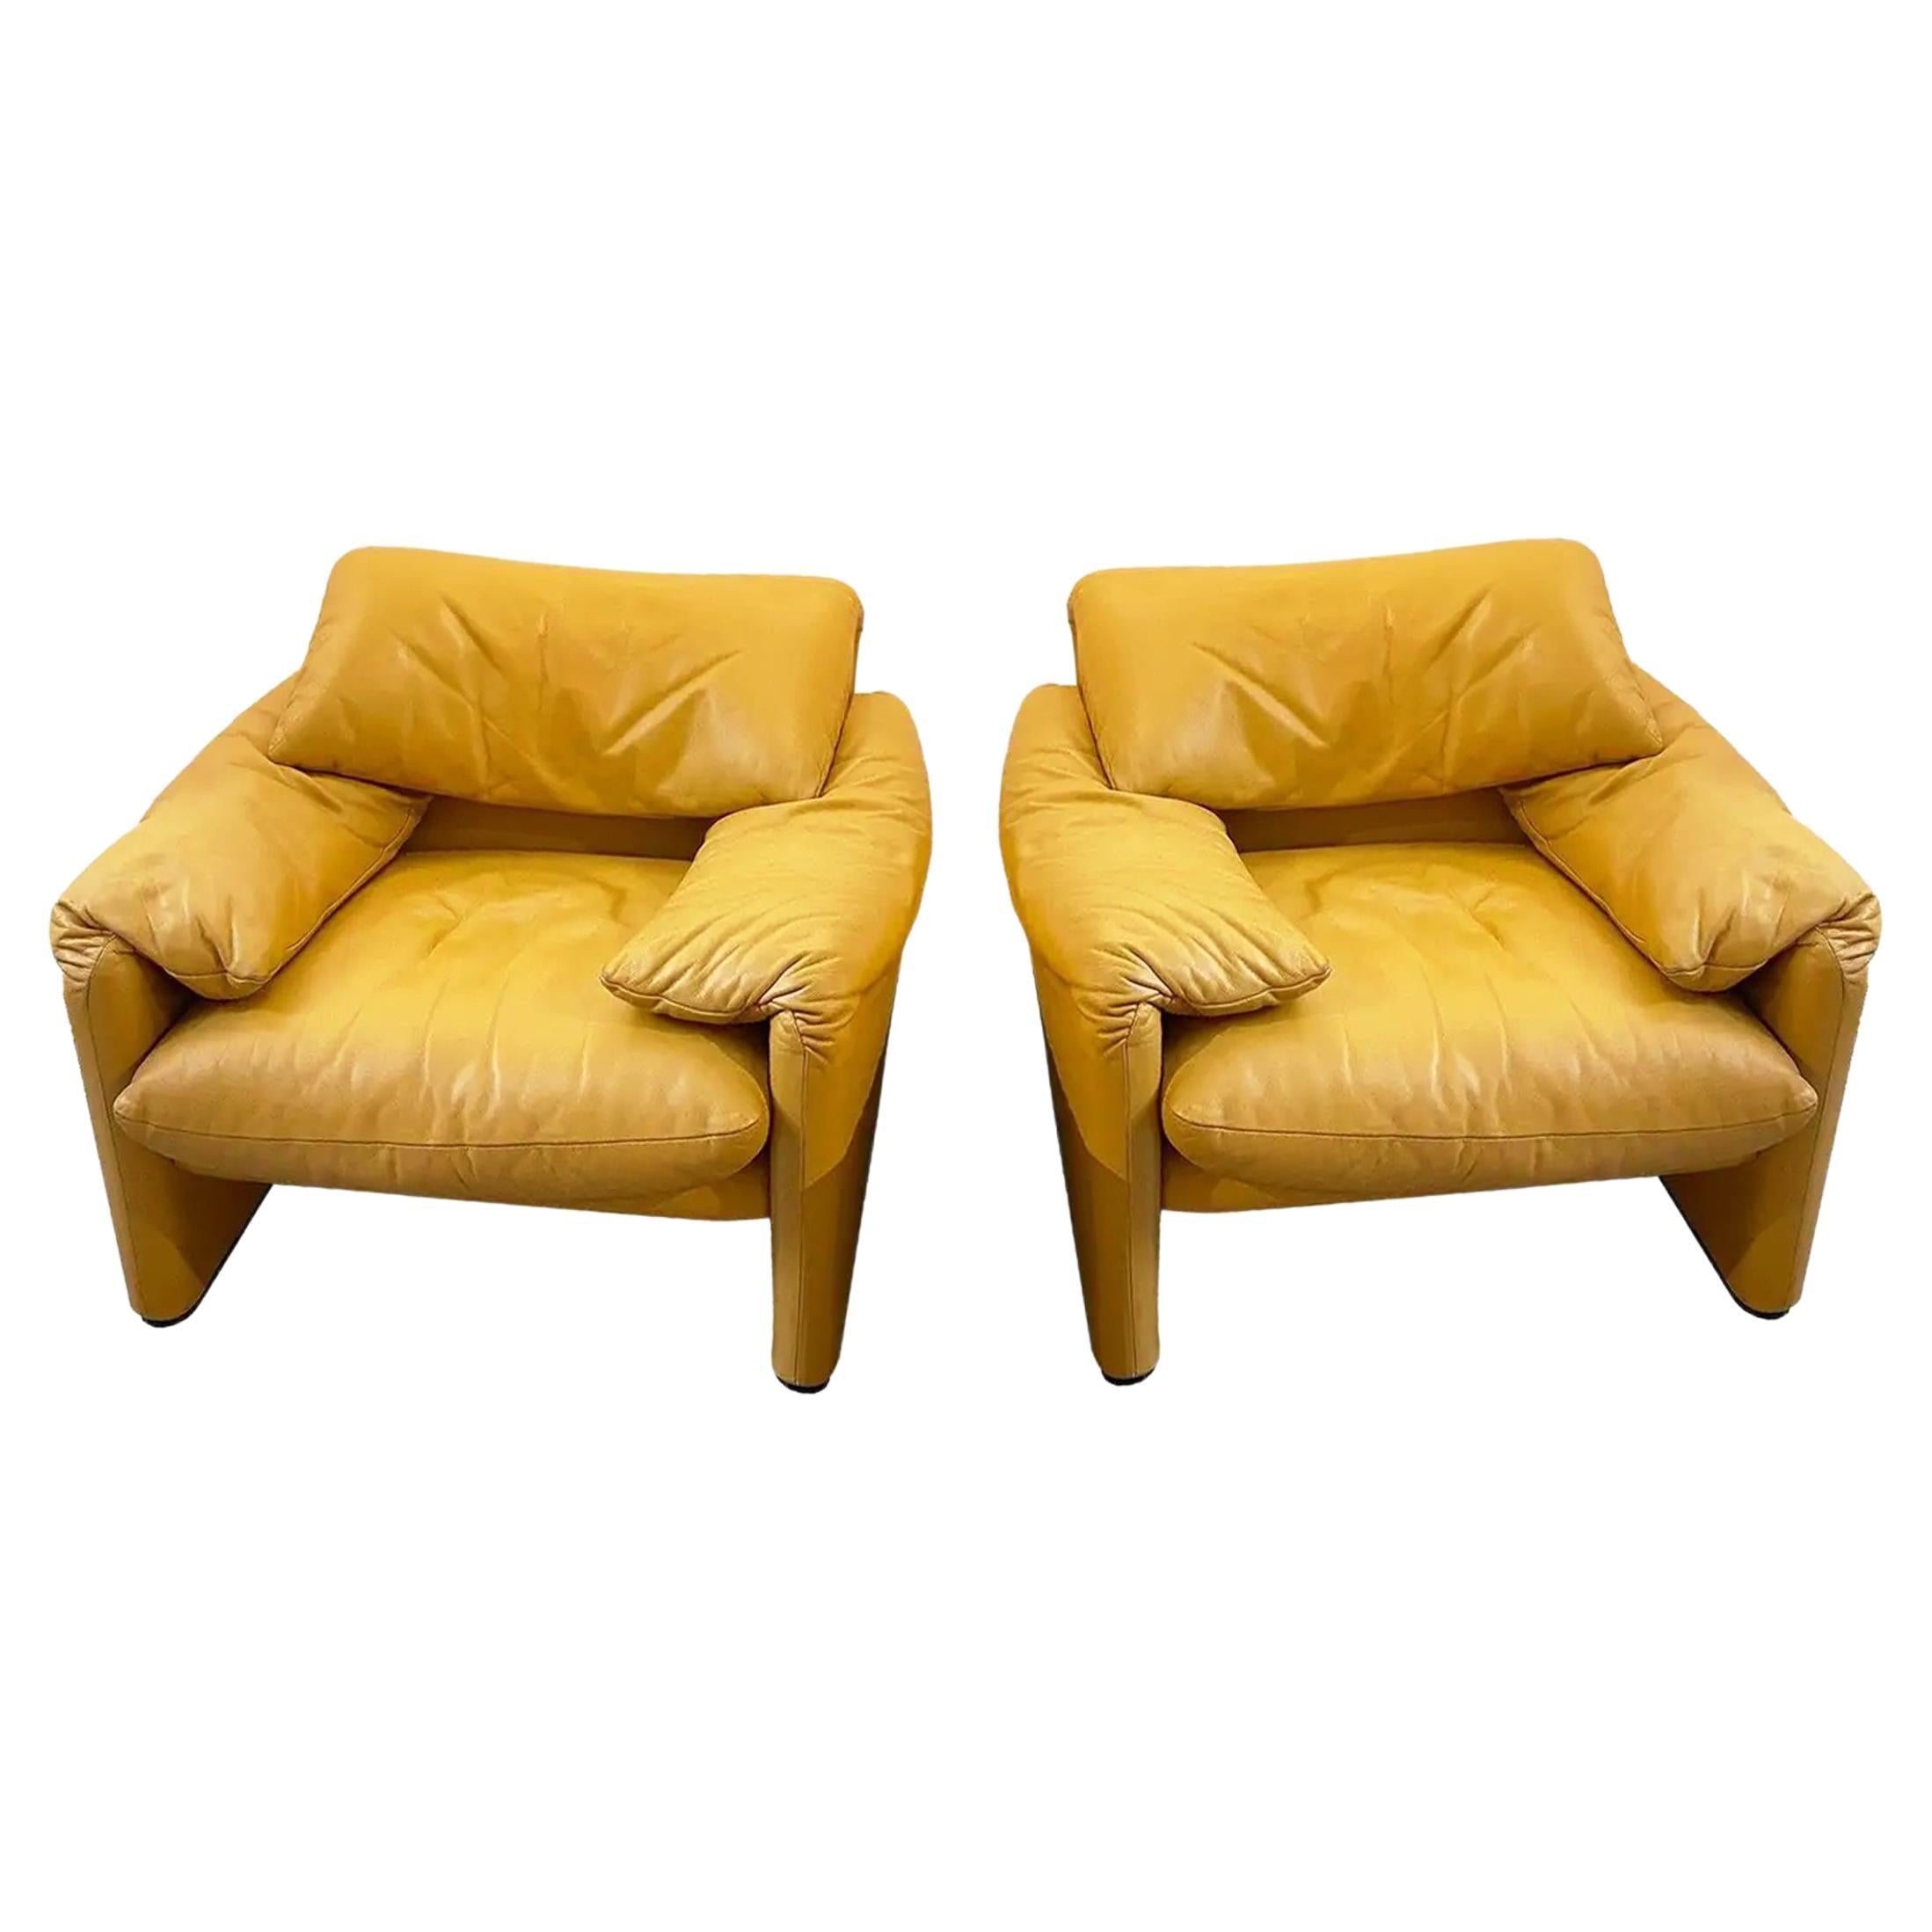 These Vico Magistretti Maralunga armchairs produced by Cassina epitomize a harmonious blend of ergonomic innovation, and enduring elegance. Designed by the visionary Italian designer, these armchairs are a celebration of comfort, style, and the art